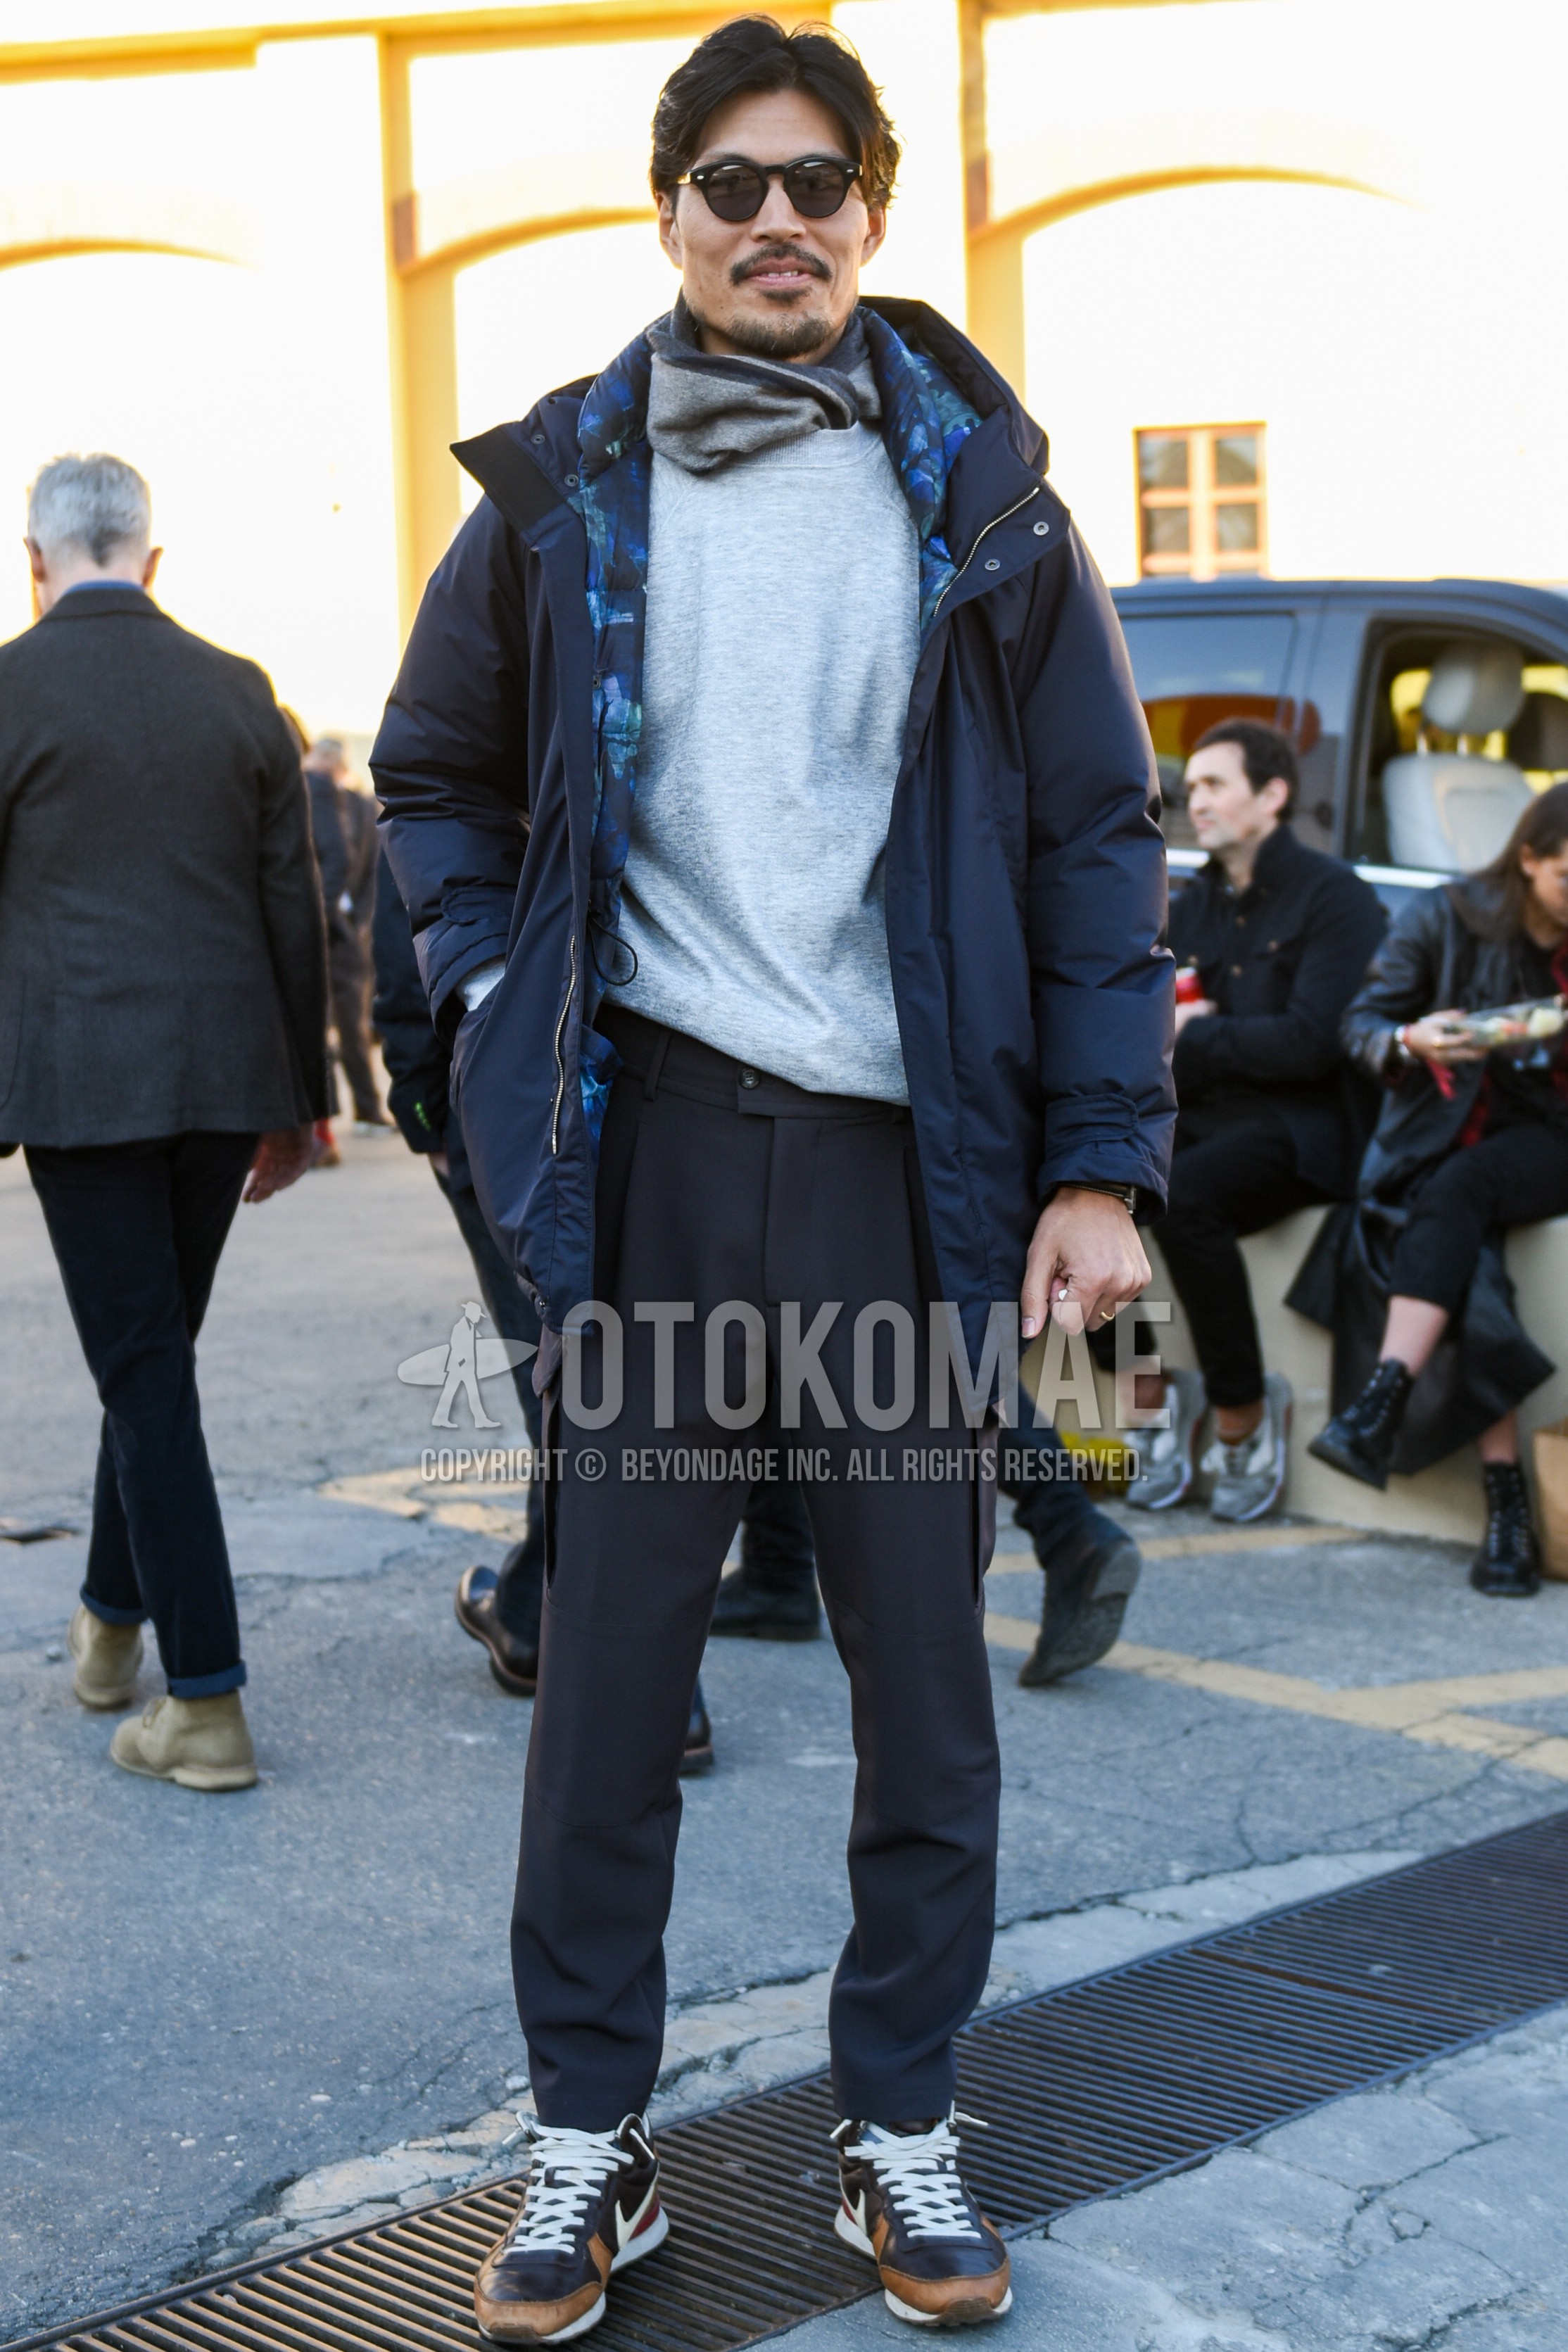 Men's winter outfit with black plain sunglasses, gray plain scarf, dark gray plain hooded coat, gray plain sweatshirt, gray plain slacks, gray plain cargo pants, brown navy low-cut sneakers.